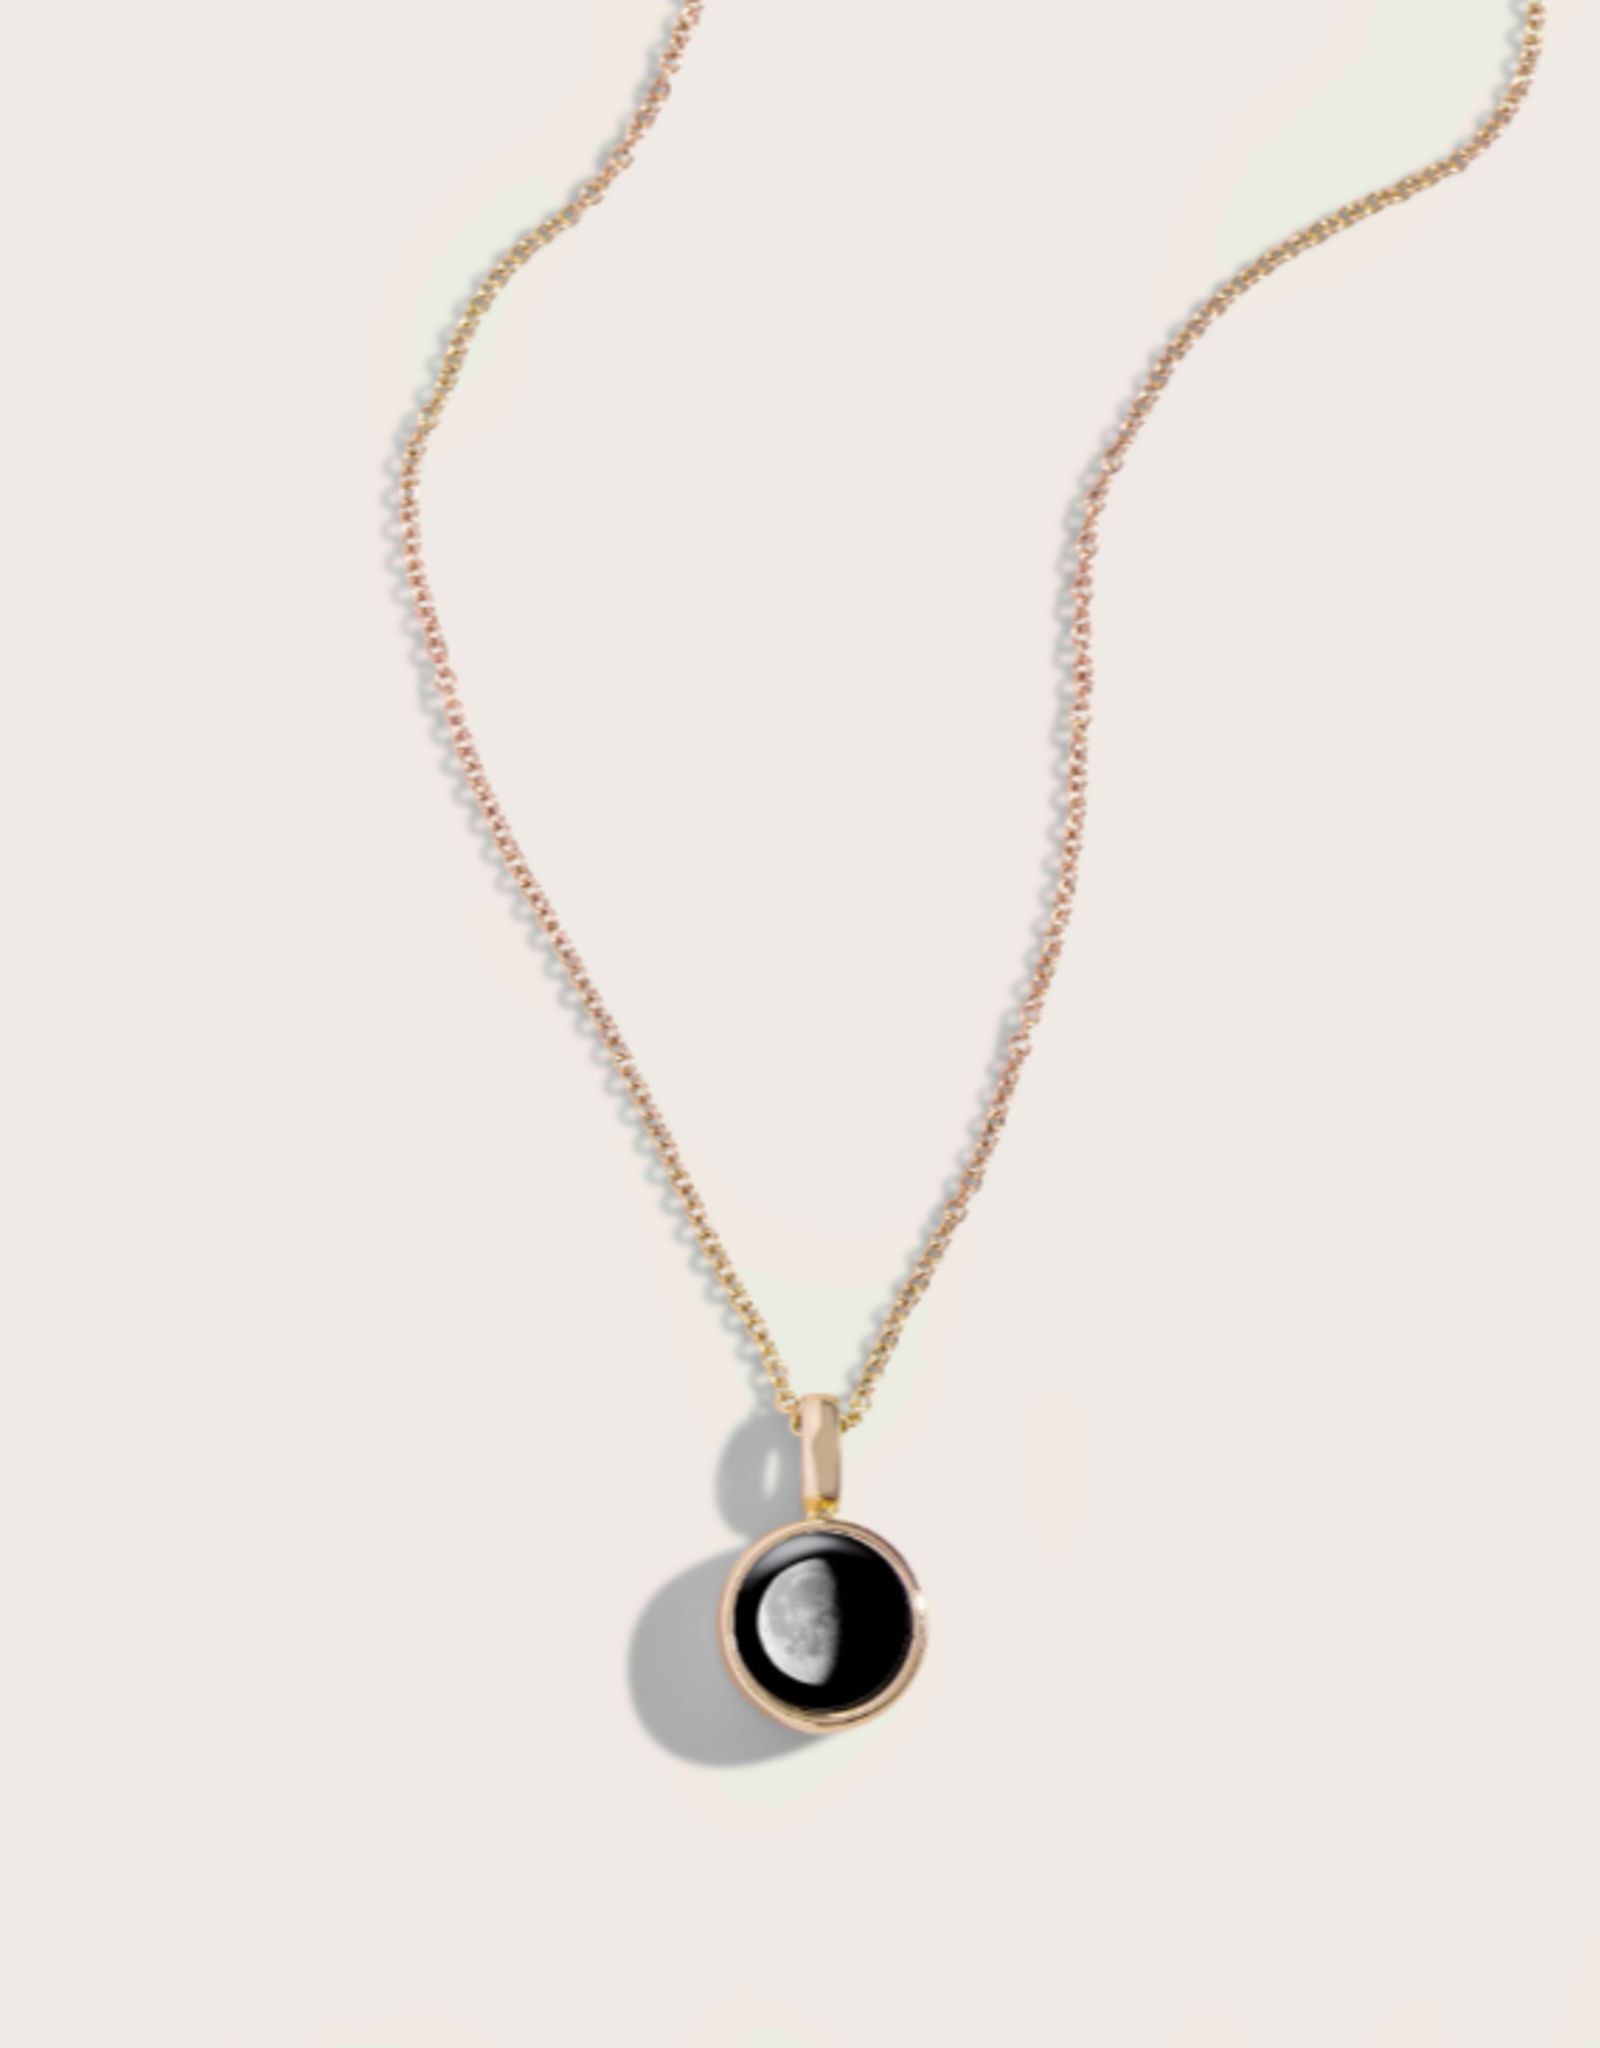 *Moonglow Sky Light Gold Necklace